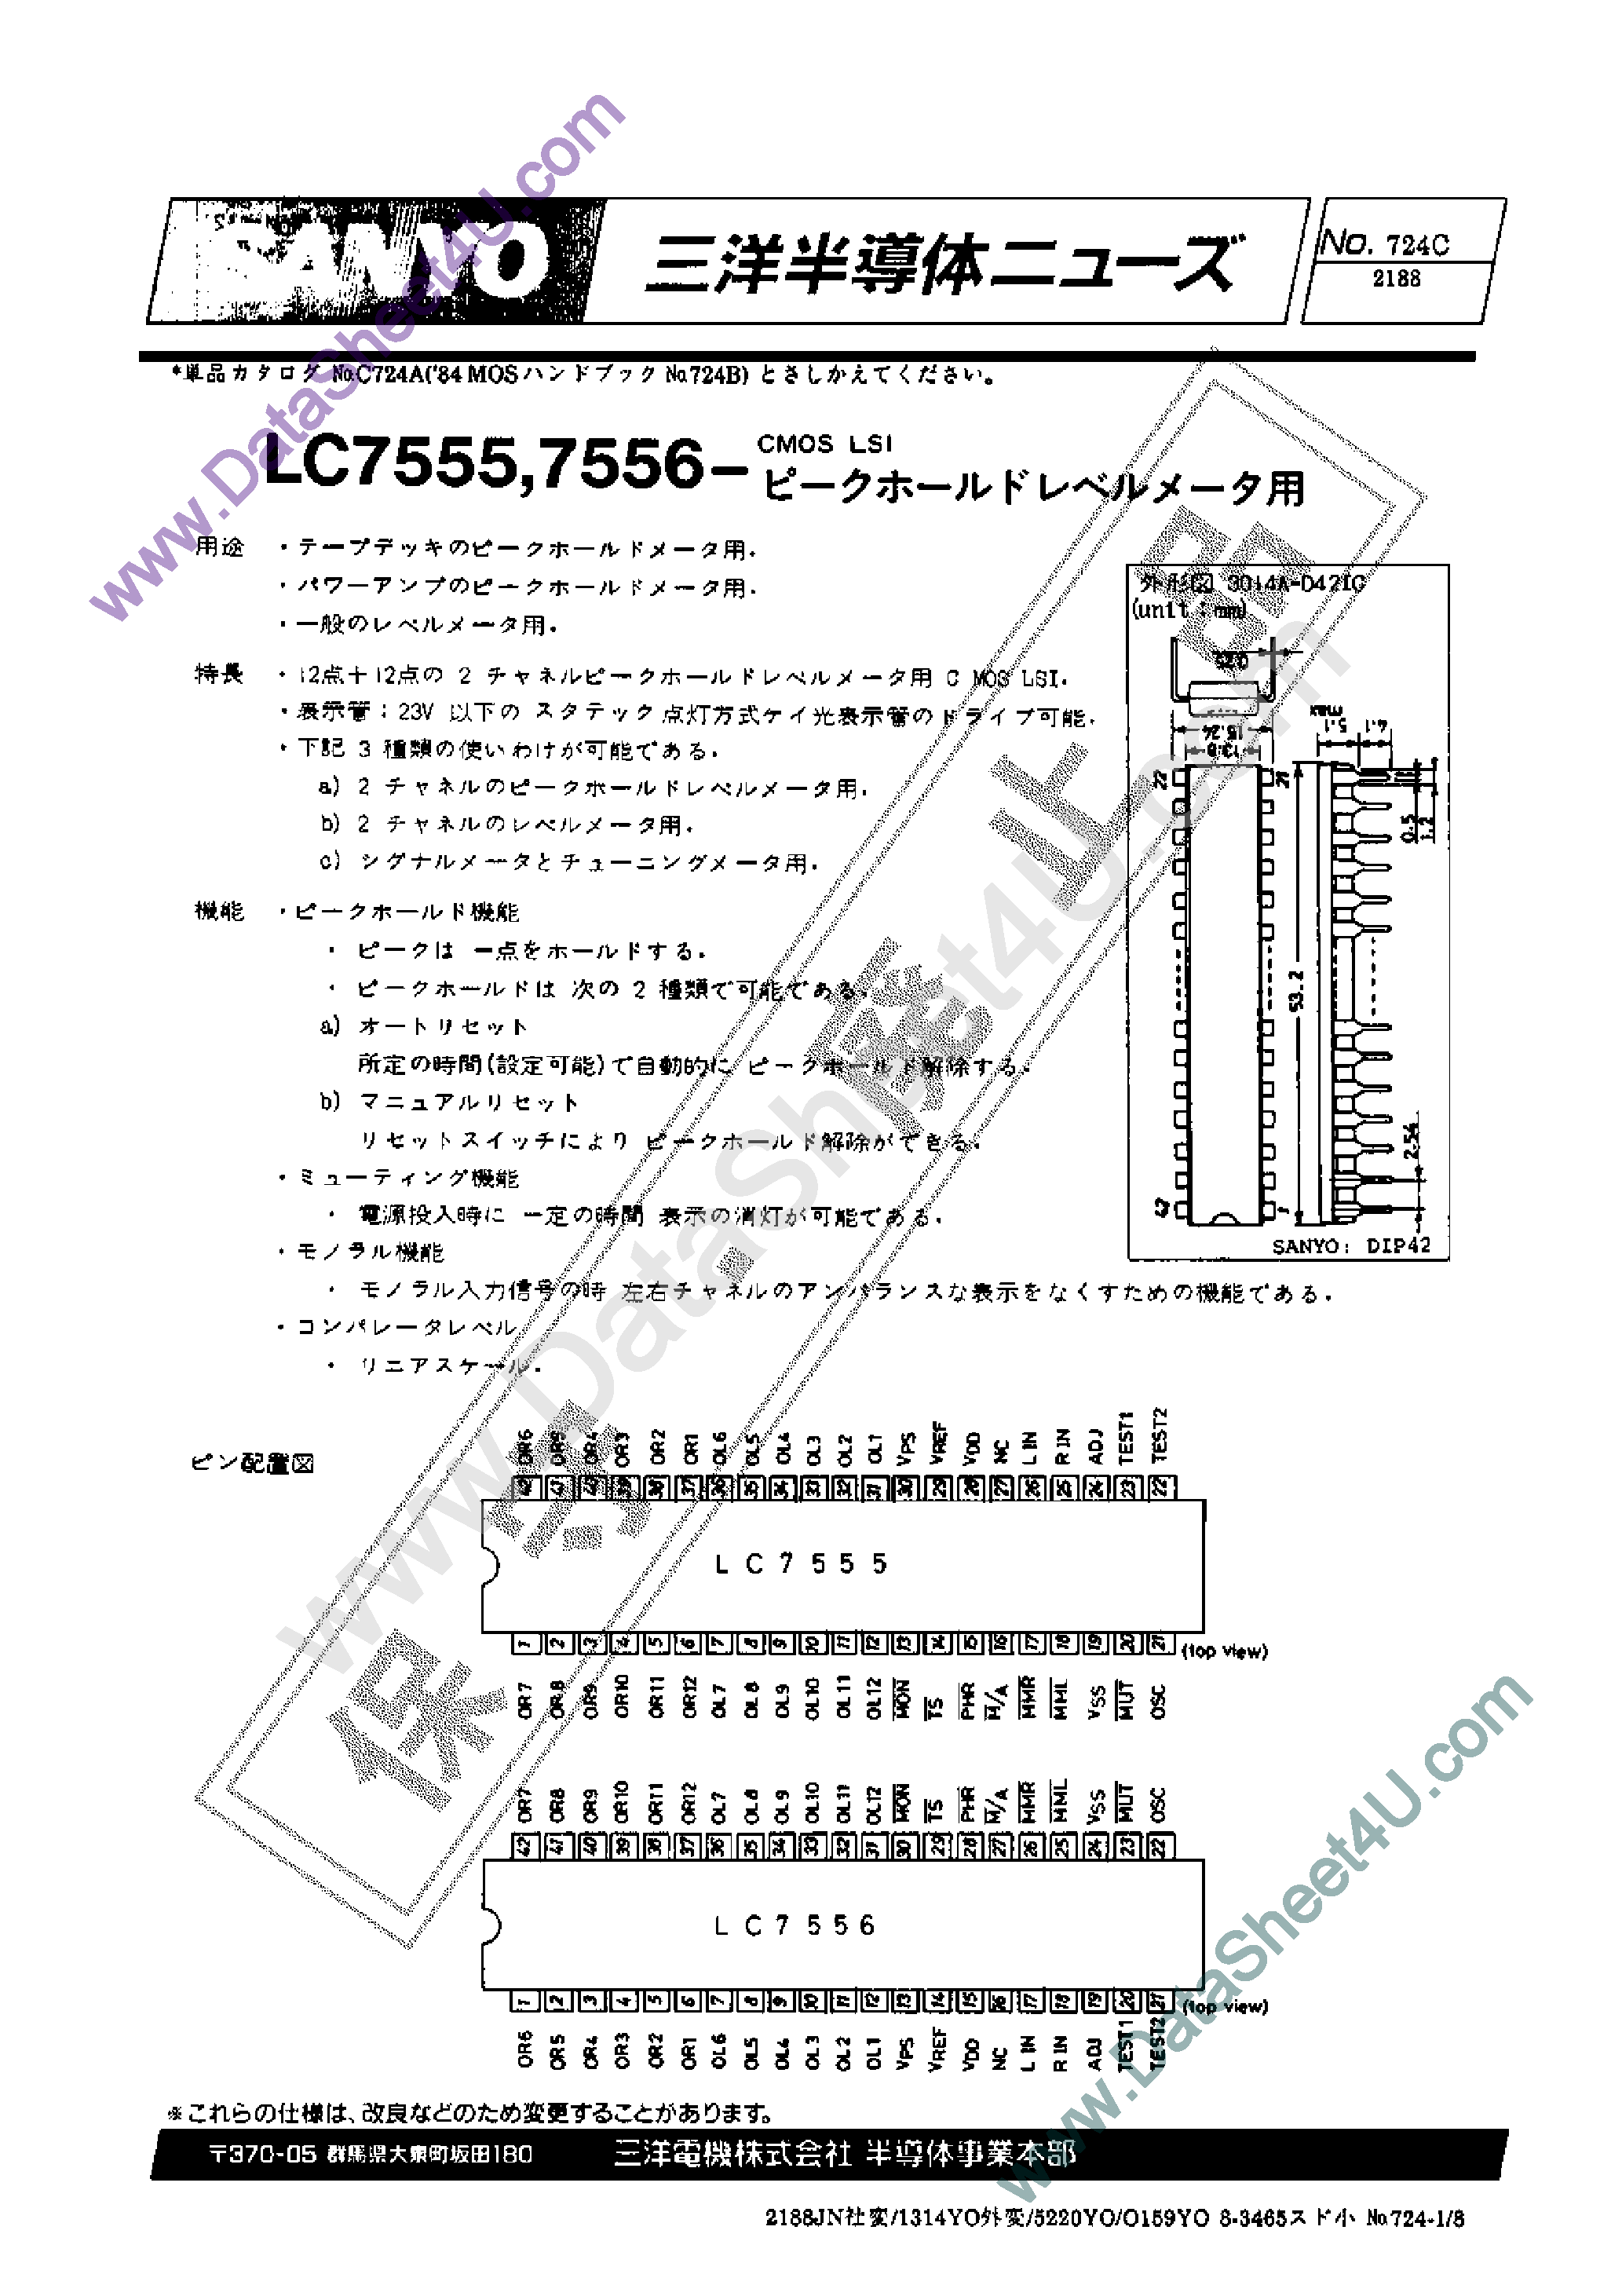 Datasheet LC7555 - (LC7555 / LC7556) CMOS LSI page 1